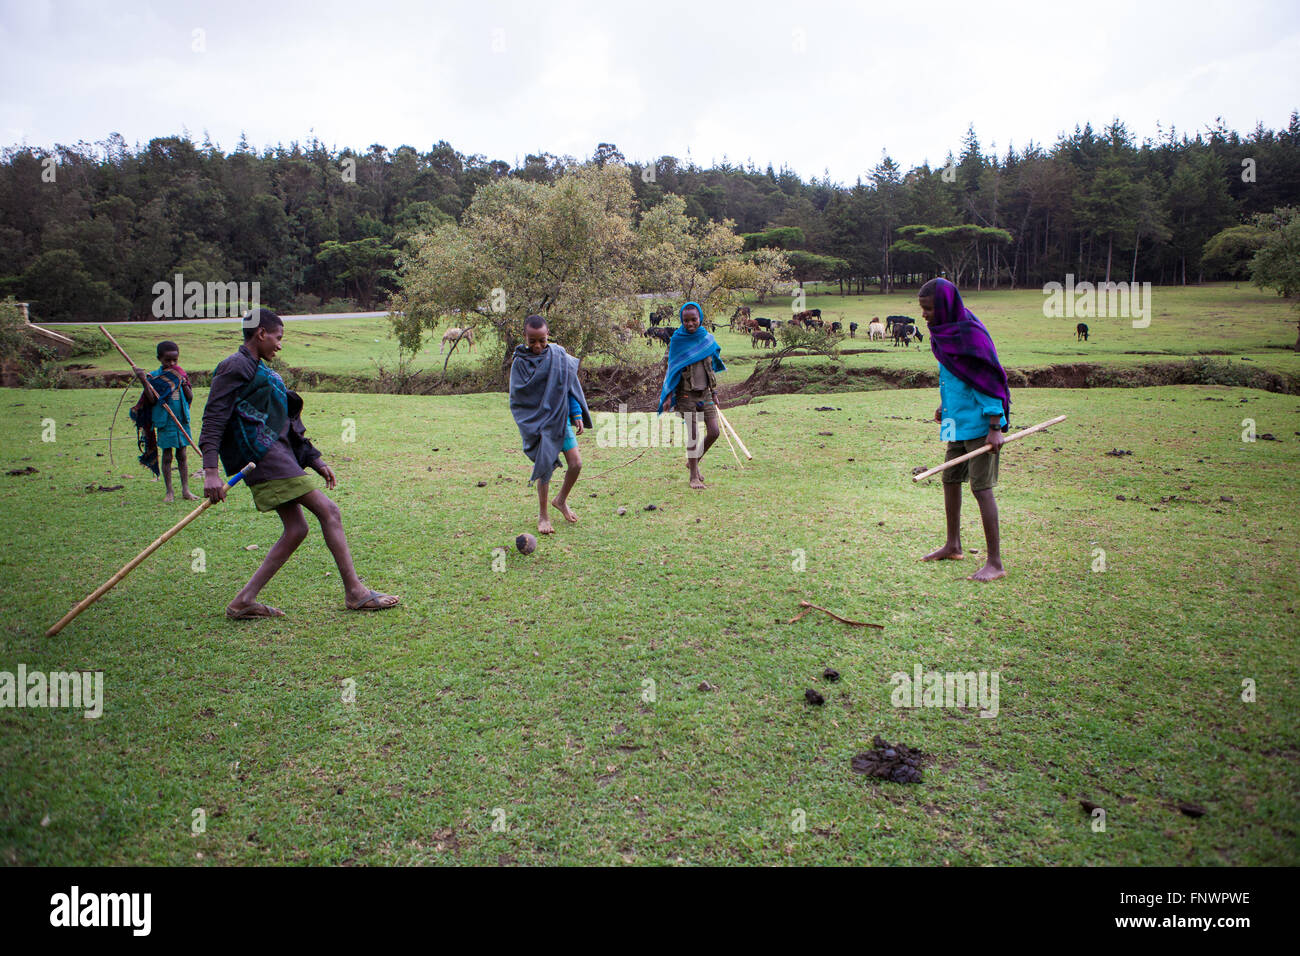 A group of young boys play a game of football as they look after their family's cattle, Ethiopia, Africa Stock Photo